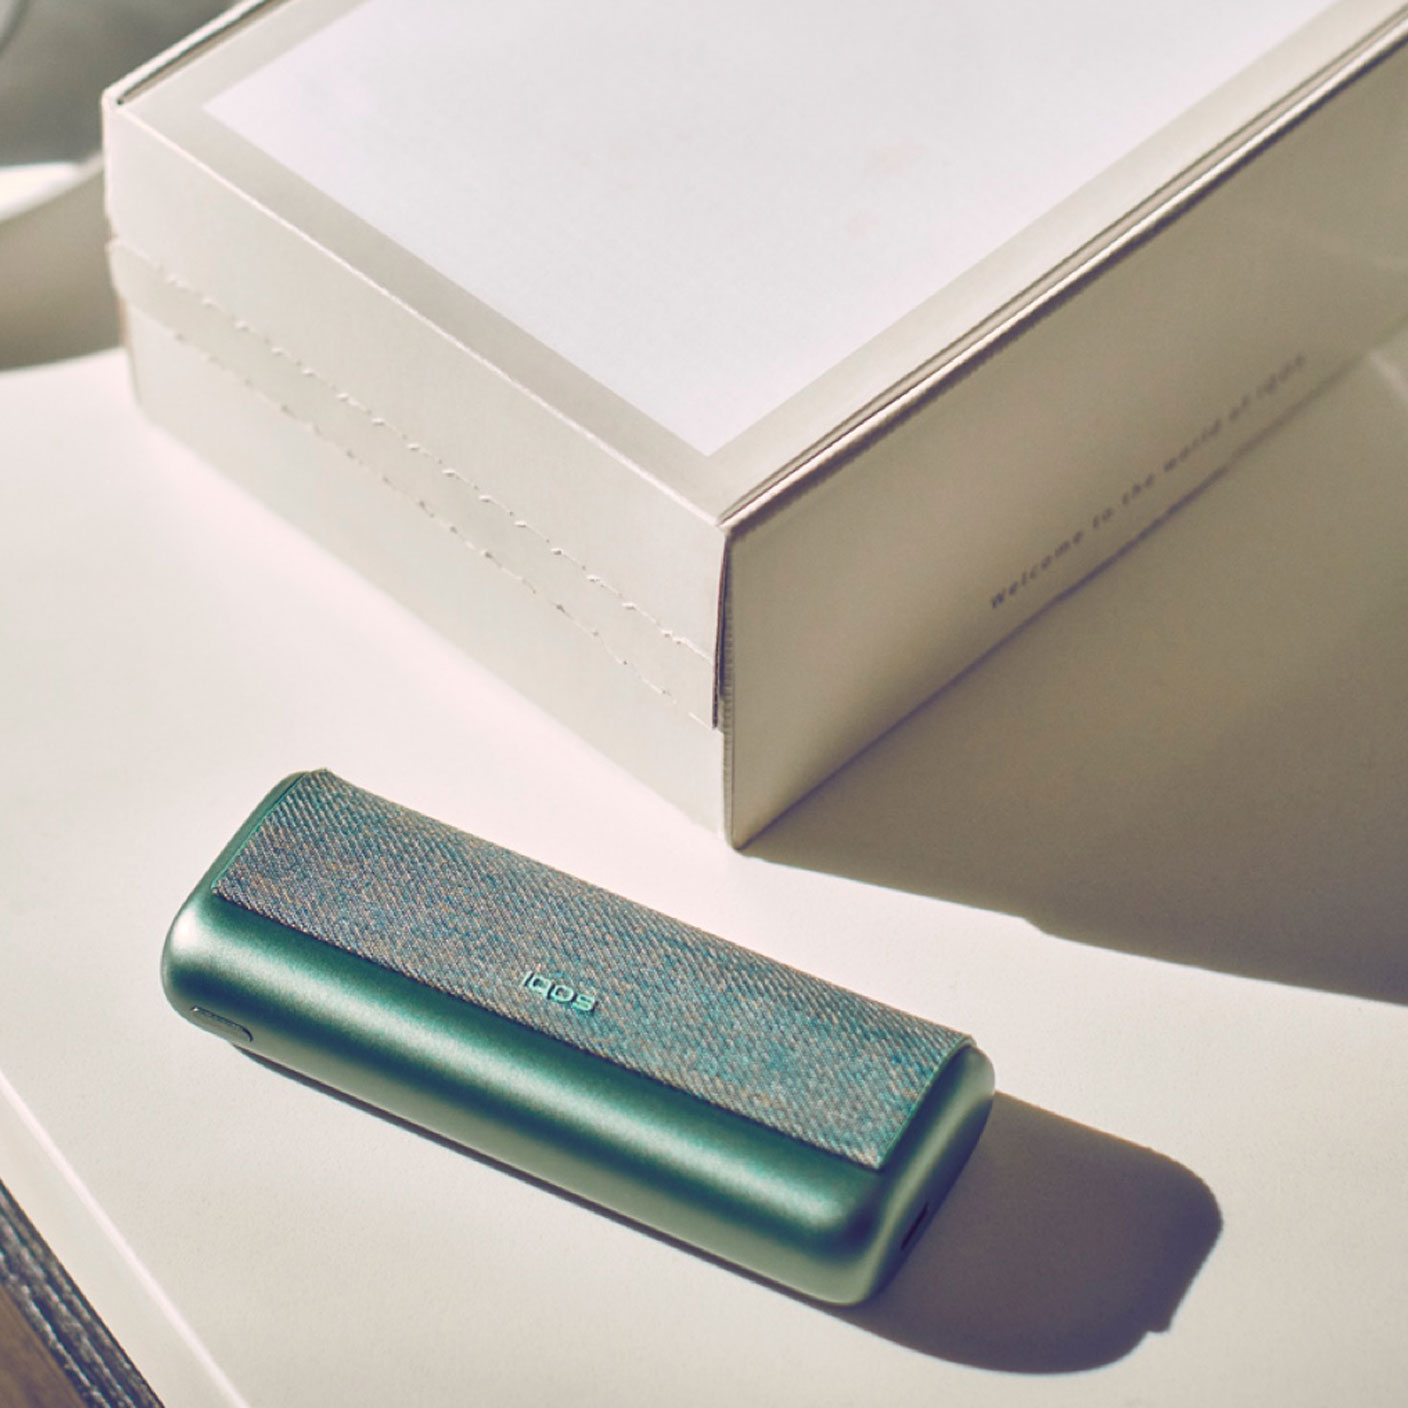 A jade green IQOS ILUMA PRIME Pocket Charger and an IQOS box on a table.